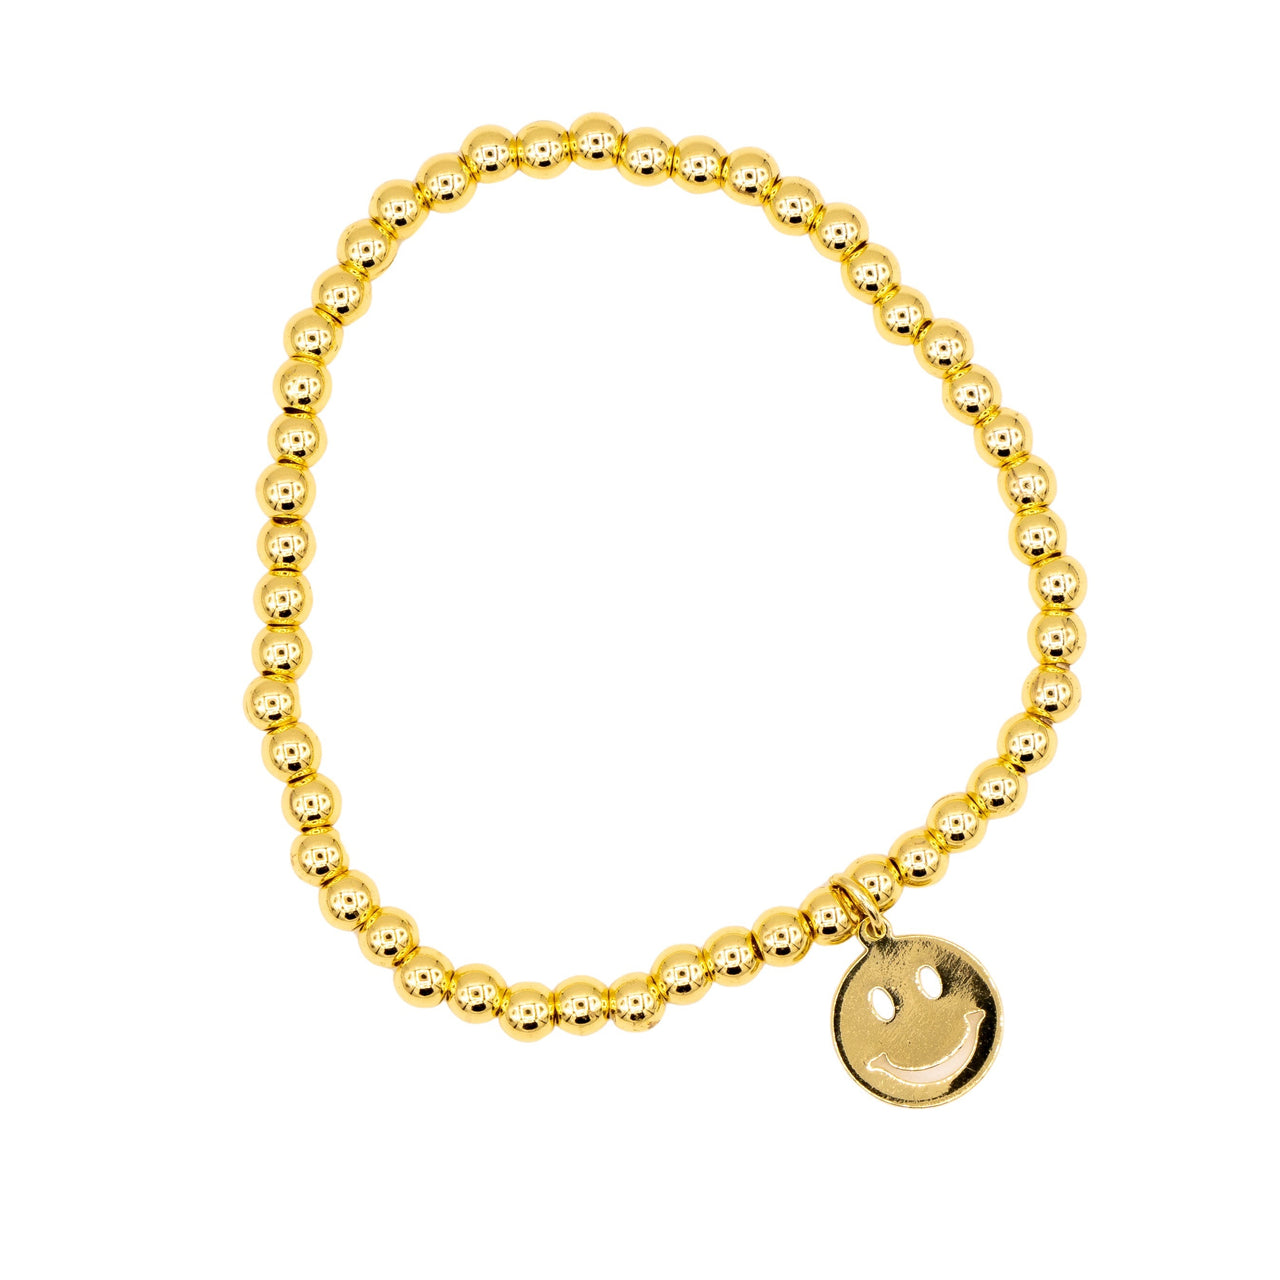 The 4mm Gold and Smiley Face Beaded Bracelet